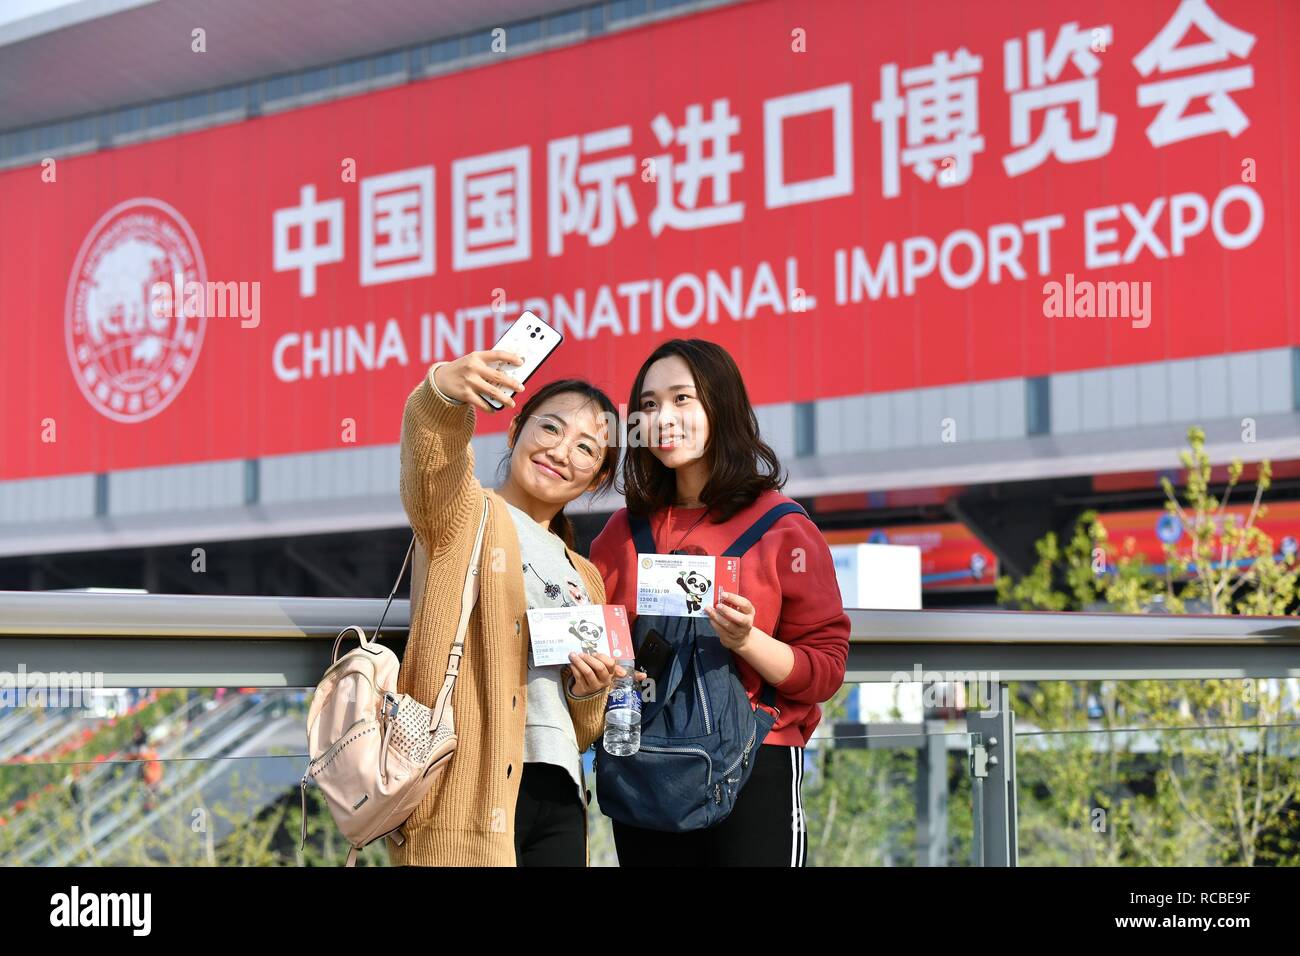 (190115) -- BEIJING, Jan. 15, 2019 (Xinhua) -- Visitors Chen Fei (L) and Weng Jingyi pose for photos in front of the venue of the first China International Import Expo (CIIE) in Shanghai, east China, Nov. 9, 2018. China's foreign trade rose 9.7 percent year on year to a historic high of 30.51 trillion yuan (about 4.5 trillion U.S. dollars) in 2018, the General Administration of Customs (GAC) said Monday. Exports rose 7.1 percent year on year to 16.42 trillion yuan last year, while imports grew 12.9 percent to 14.09 trillion yuan, resulting in a trade surplus of 2.33 trillion yuan, whic Stock Photo